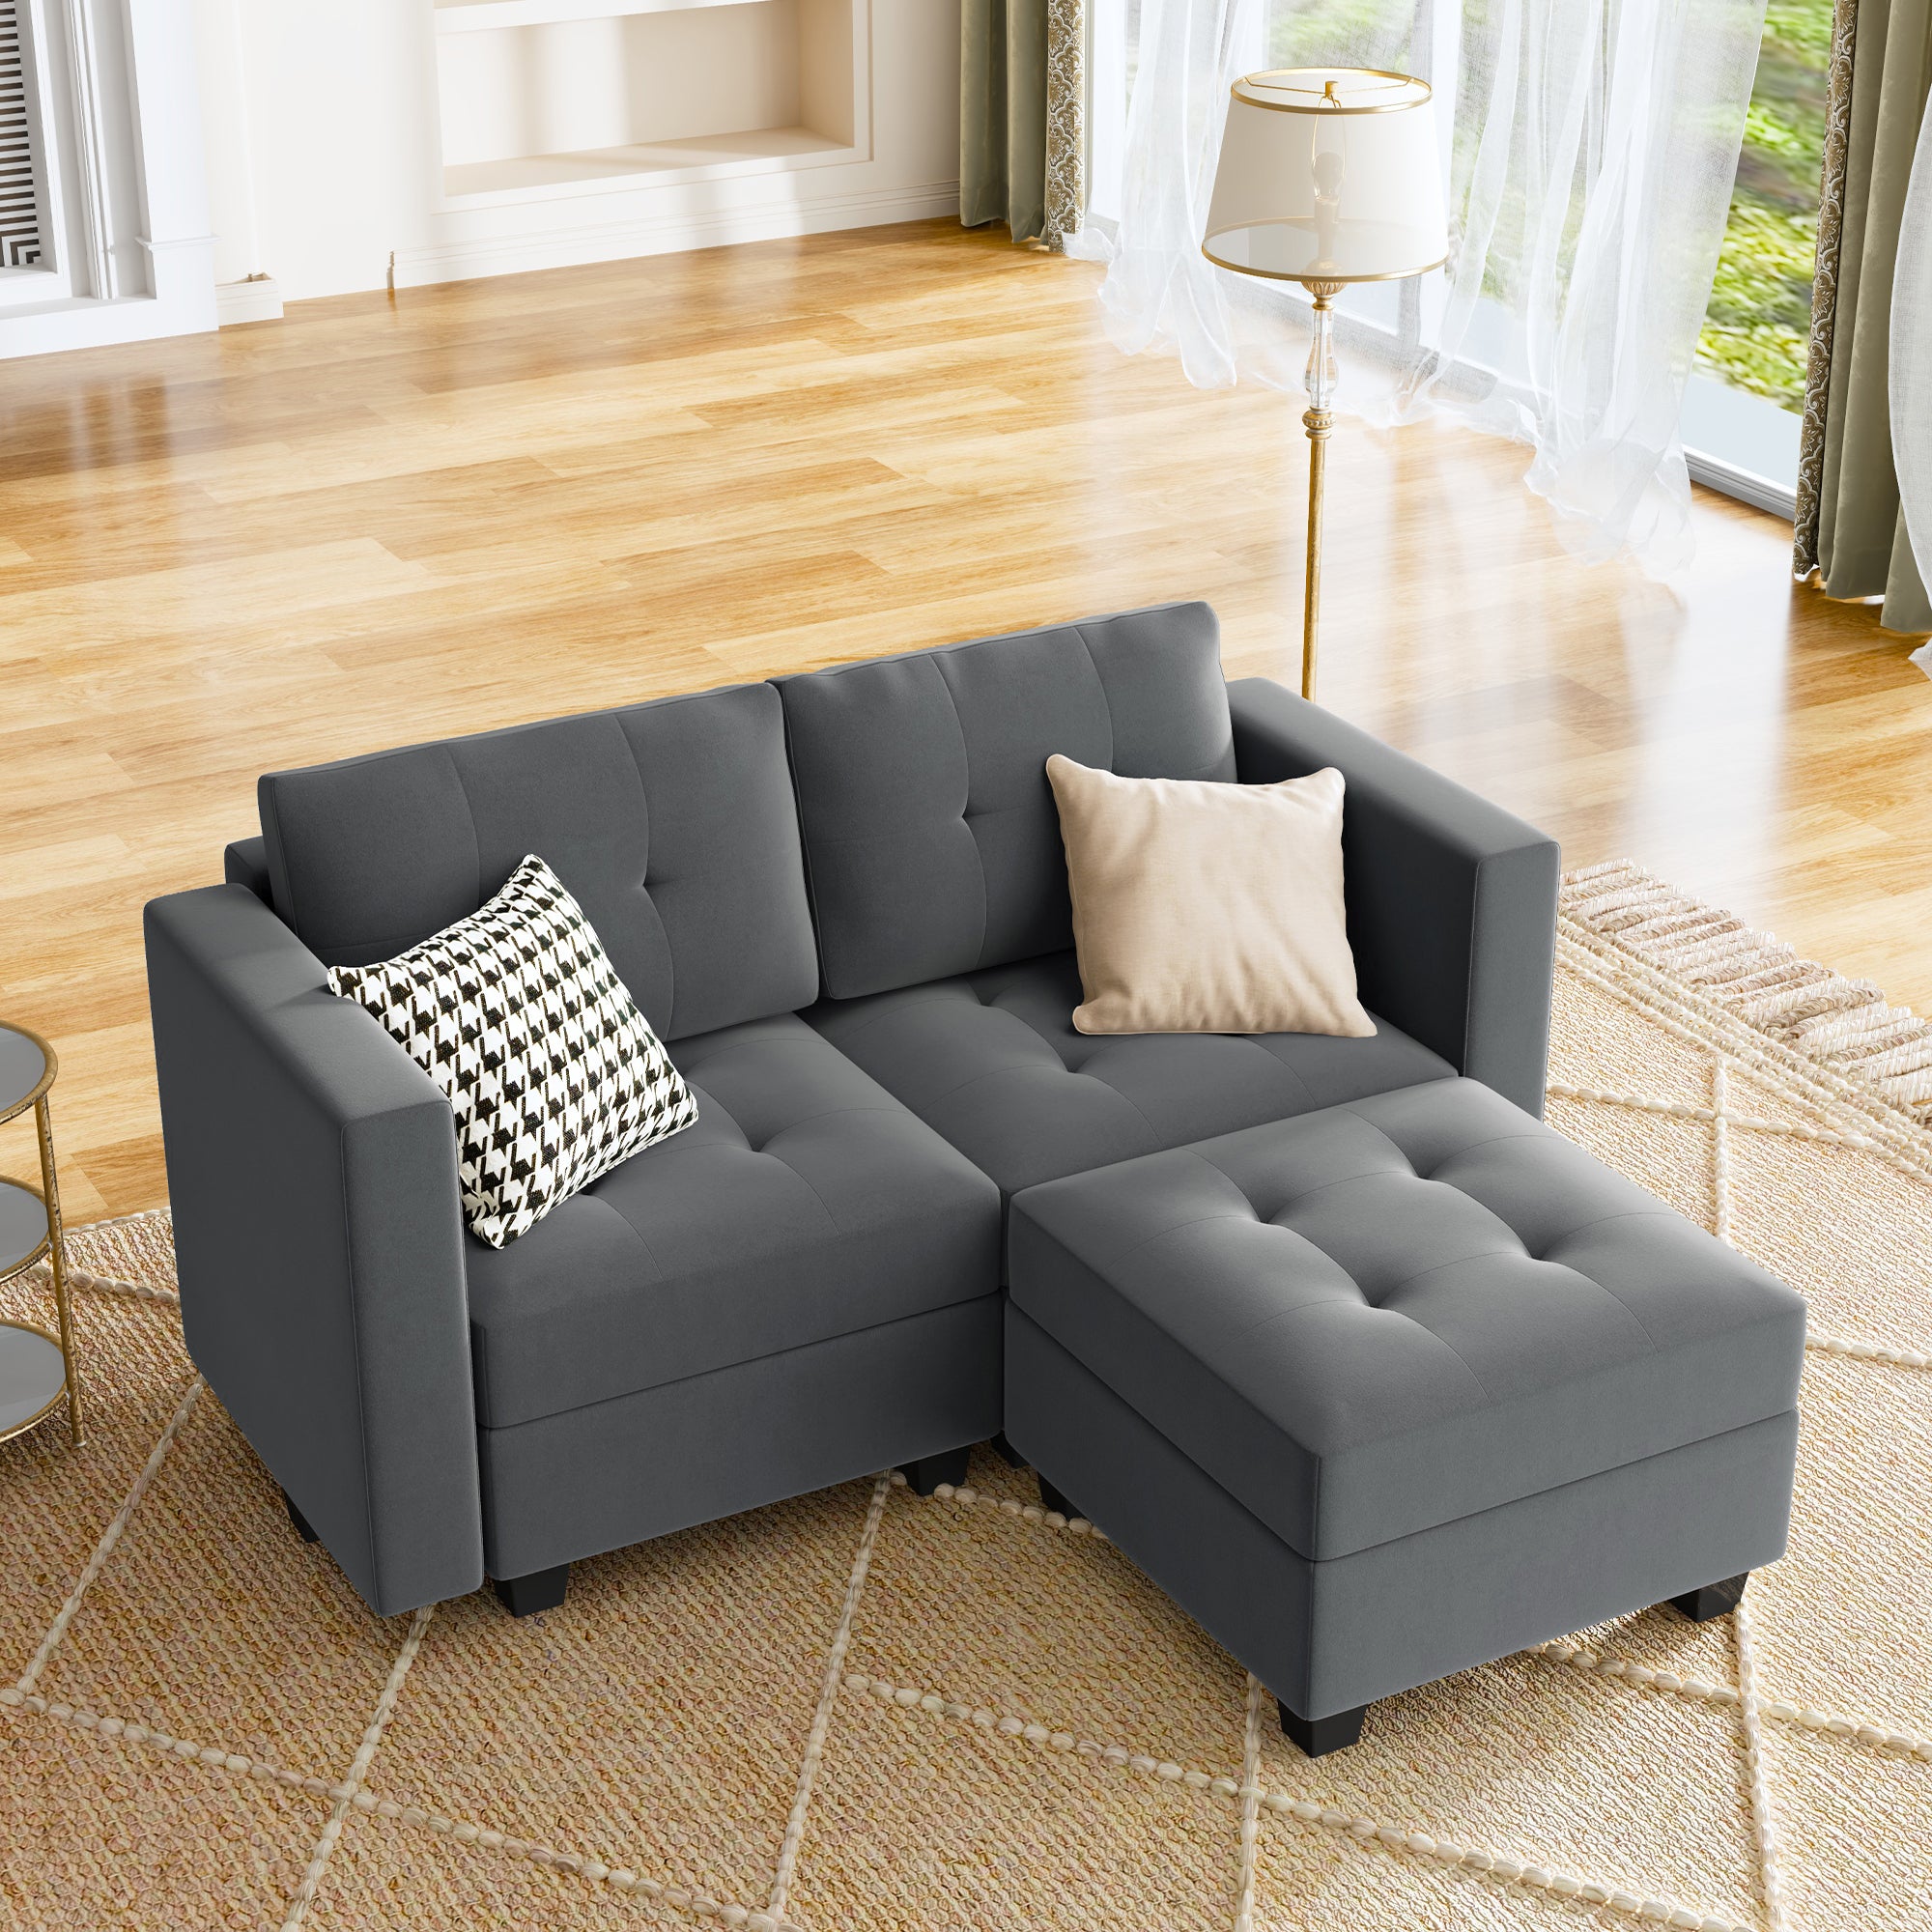 HONBAY Tufted Modular Sofa 2-Seat+1-Side Armrest+1-Ottoman with Storage Seater